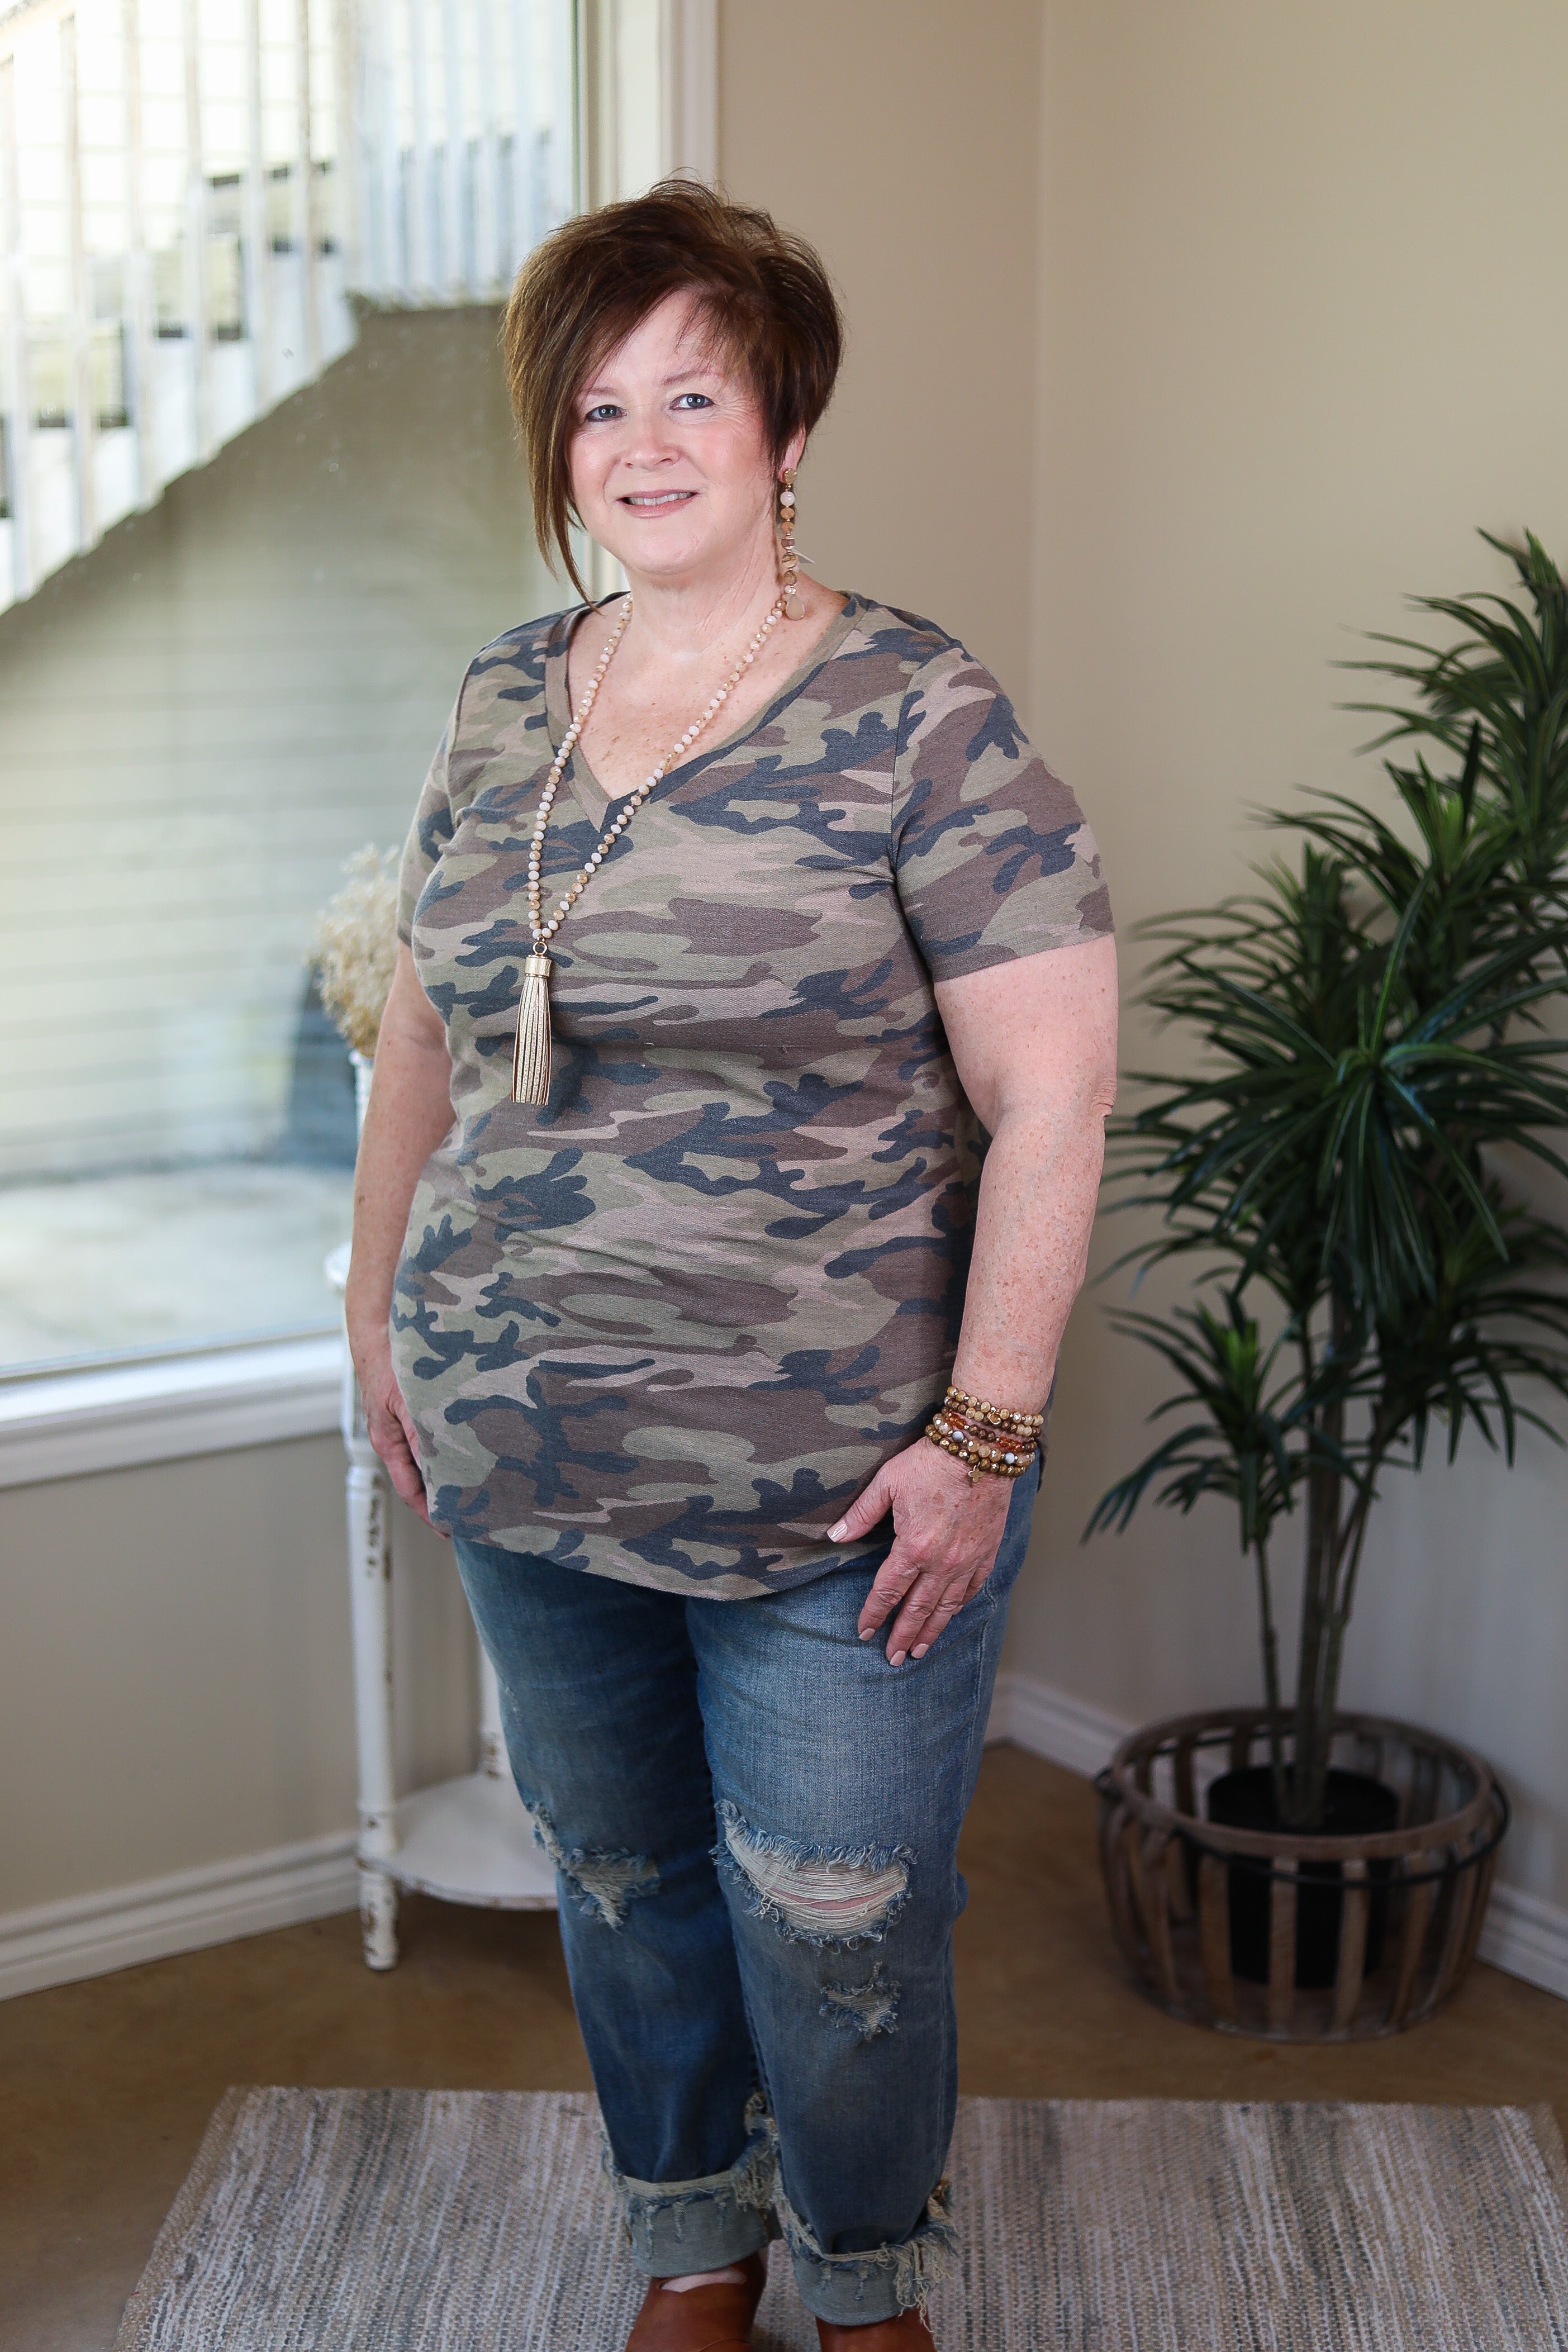 Simply The Best V Neck Short Sleeve Tee Shirt in Camouflage - Giddy Up Glamour Boutique